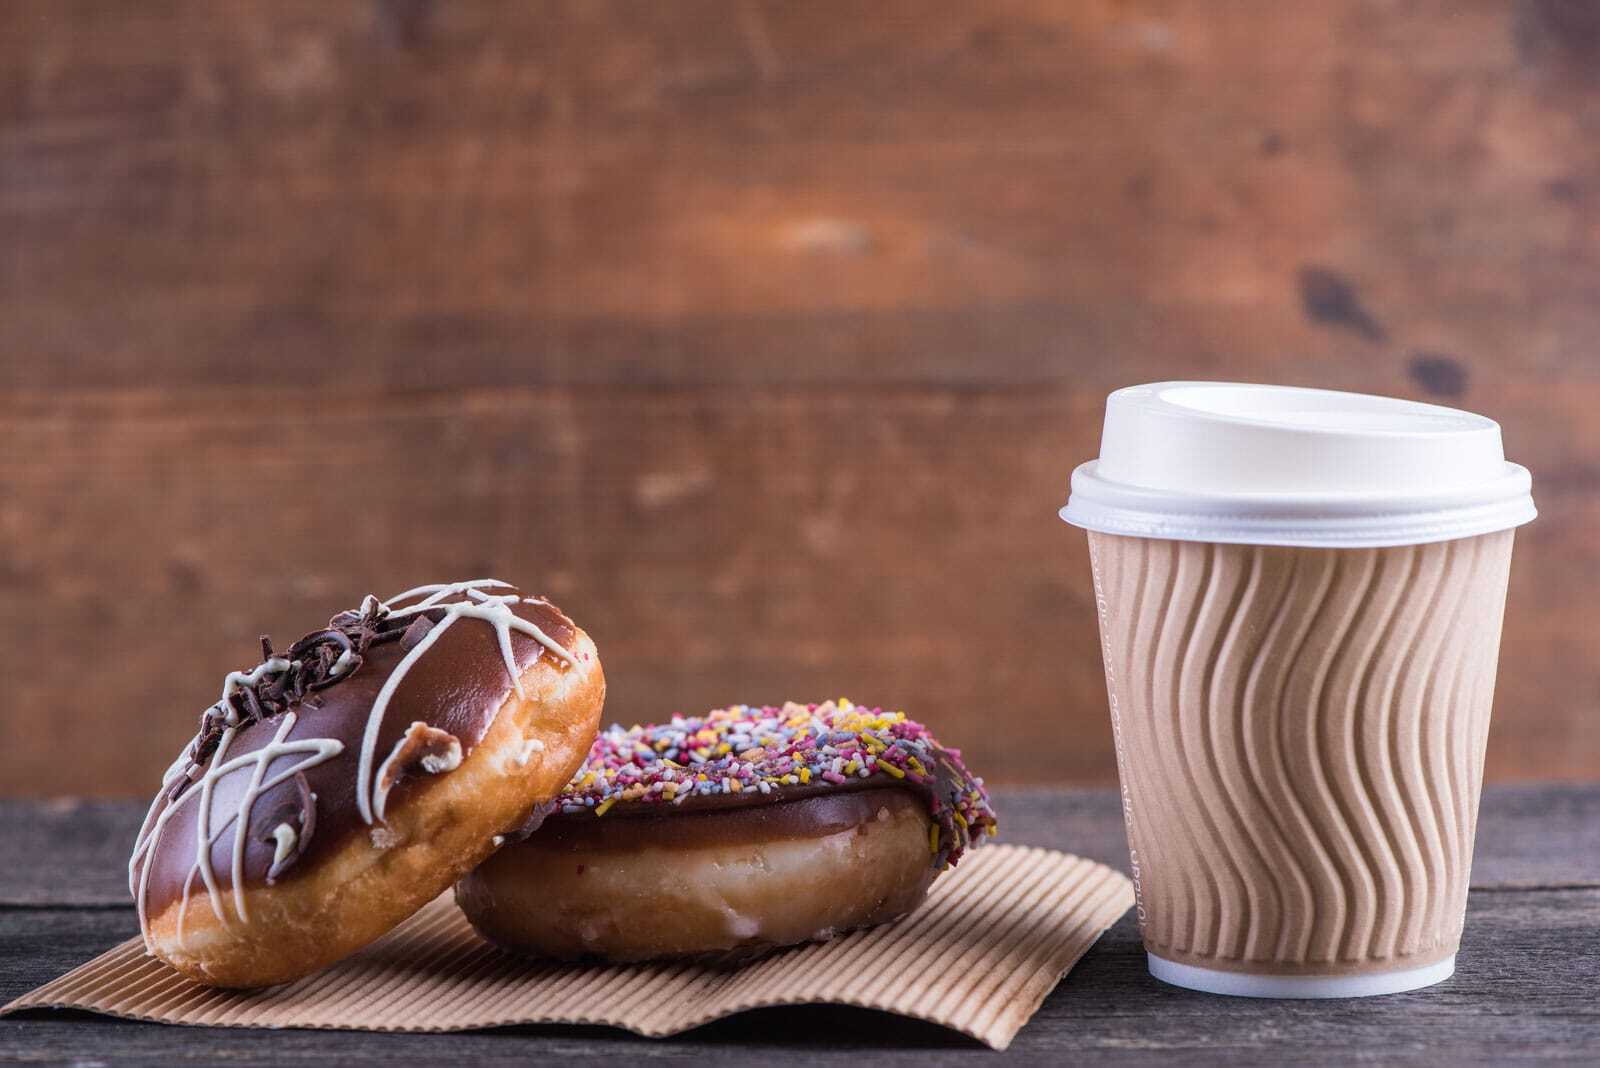 Two chocolate donuts sit beside a to-go cup of coffee.